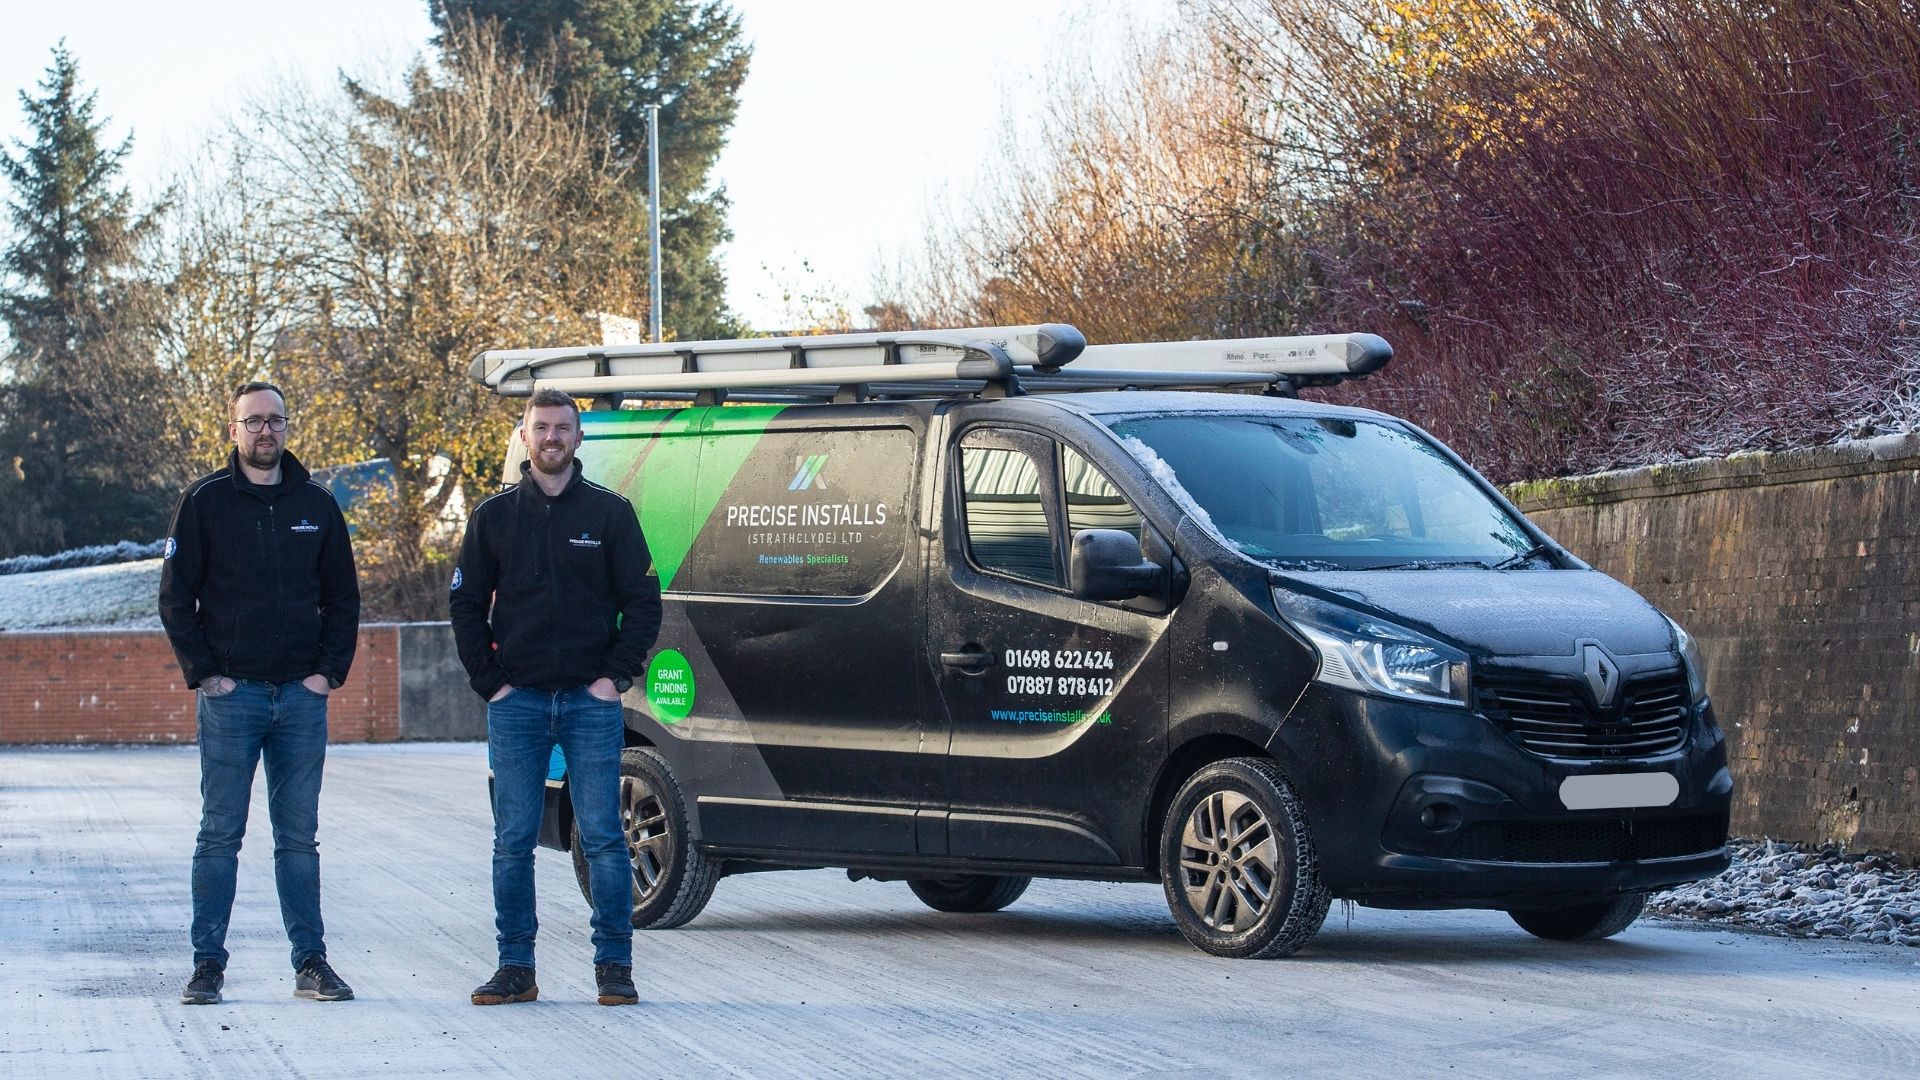 Scott and William standing in front of their Precise Installs van.